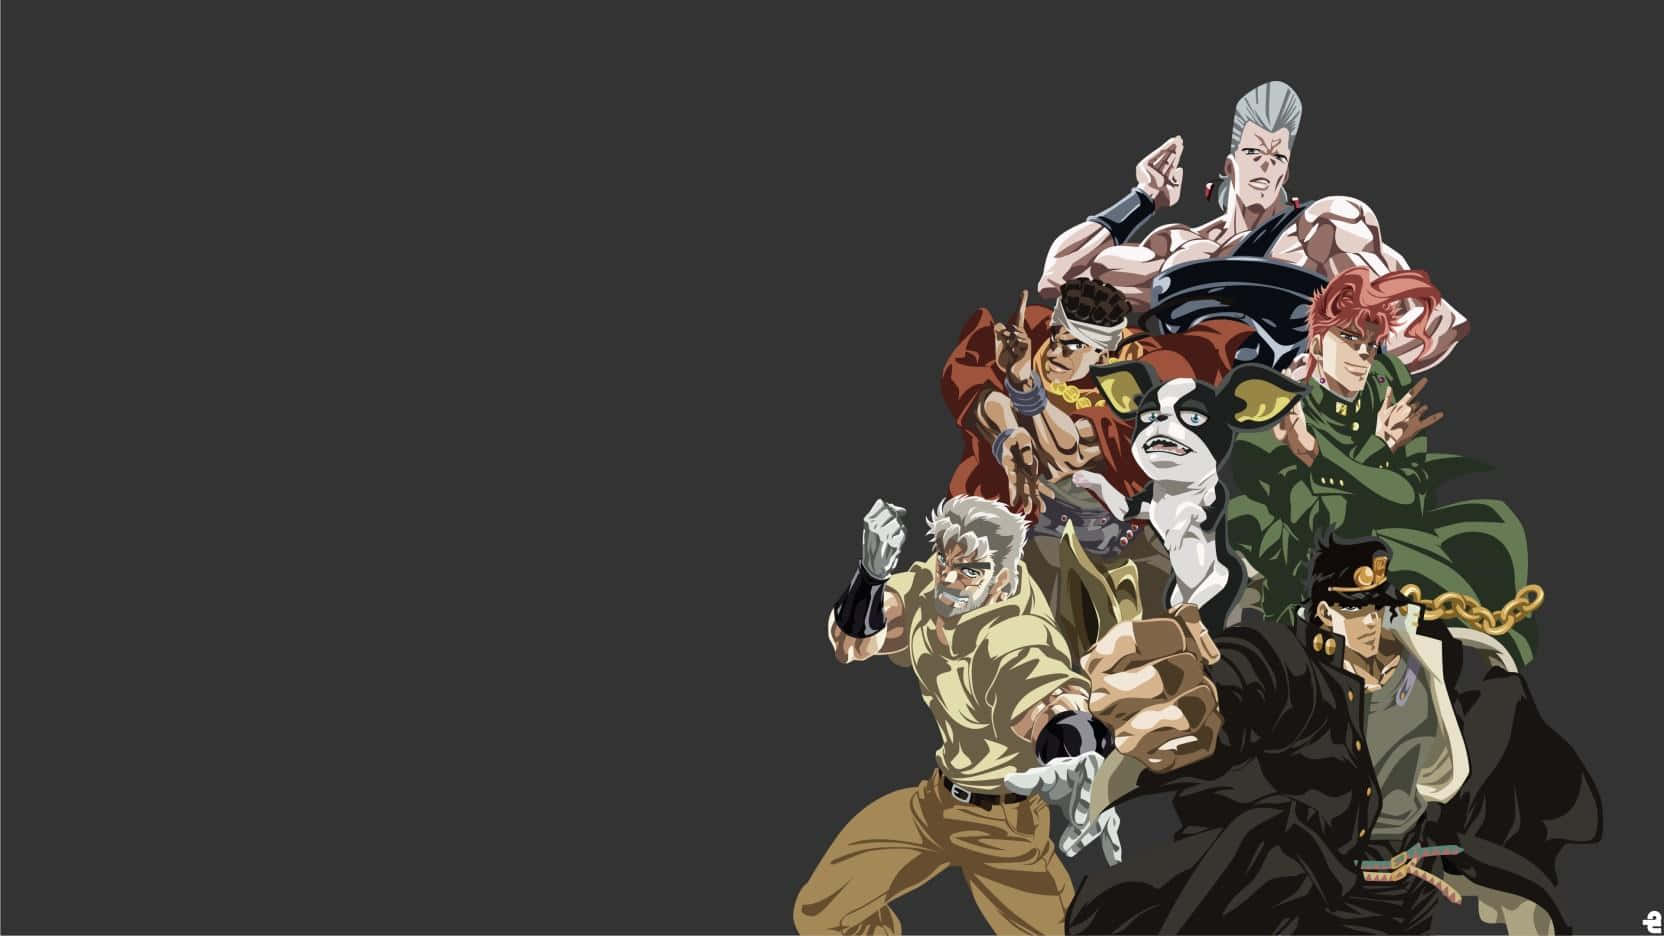 Joseph Joestar Showing His Determination And Courage In Battle. Wallpaper